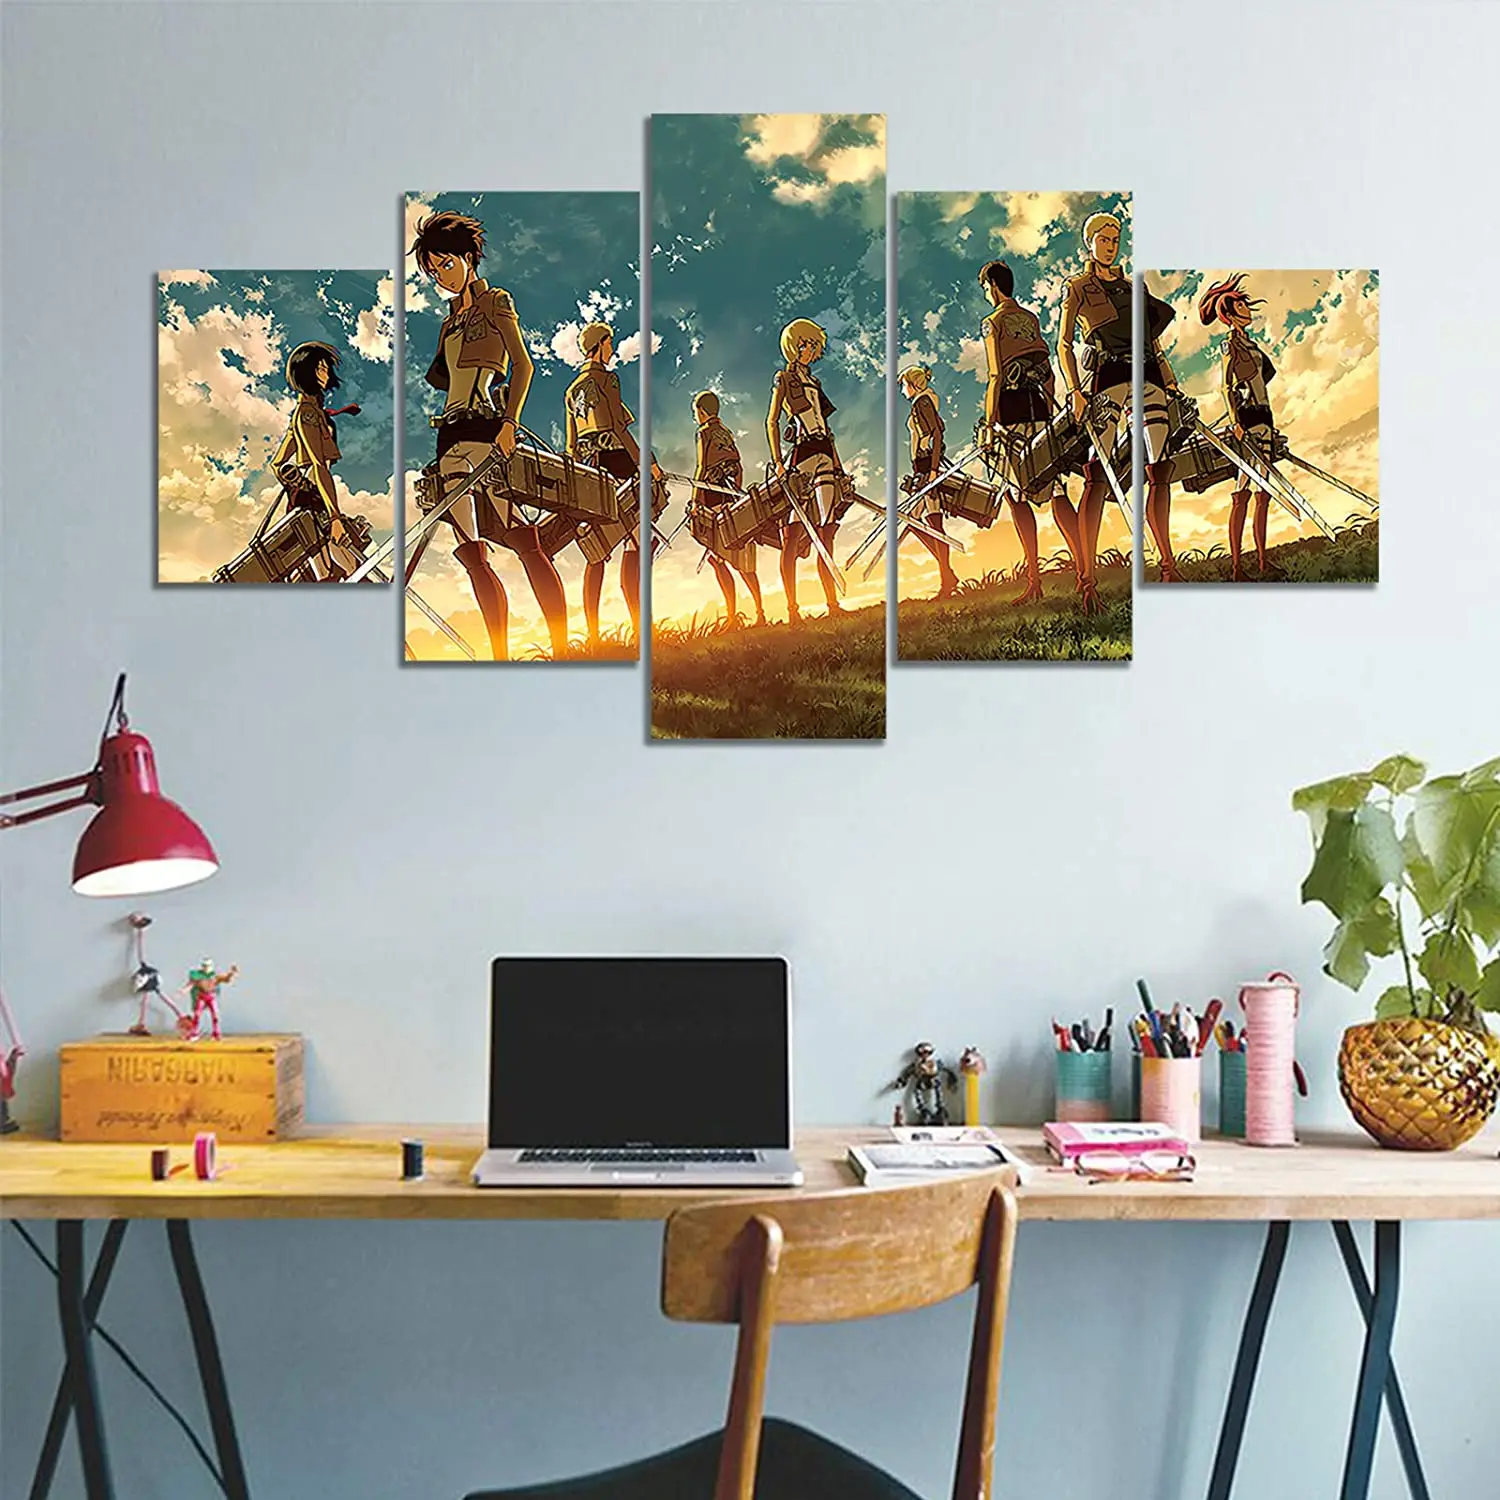 

No Framed Anime Attack On Titan 5 piece Wall Art Canvas Print posters Paintings Painting For Living Room Home Decor Pictures